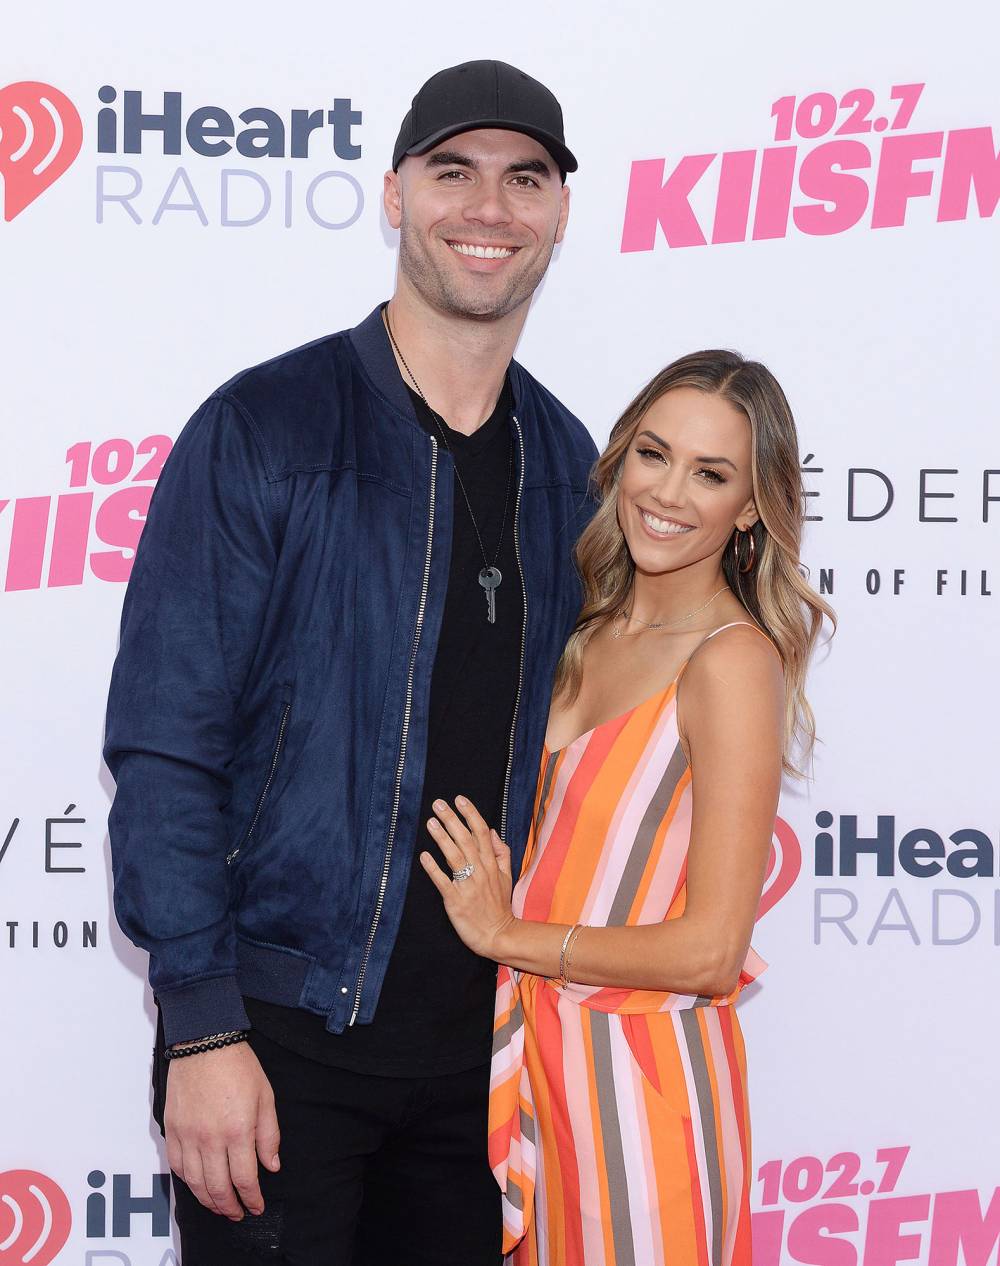 Jana-Kramer-When-Mike-Caussin-I-Will-Introduce-New-Partners-Our-Kids-0001